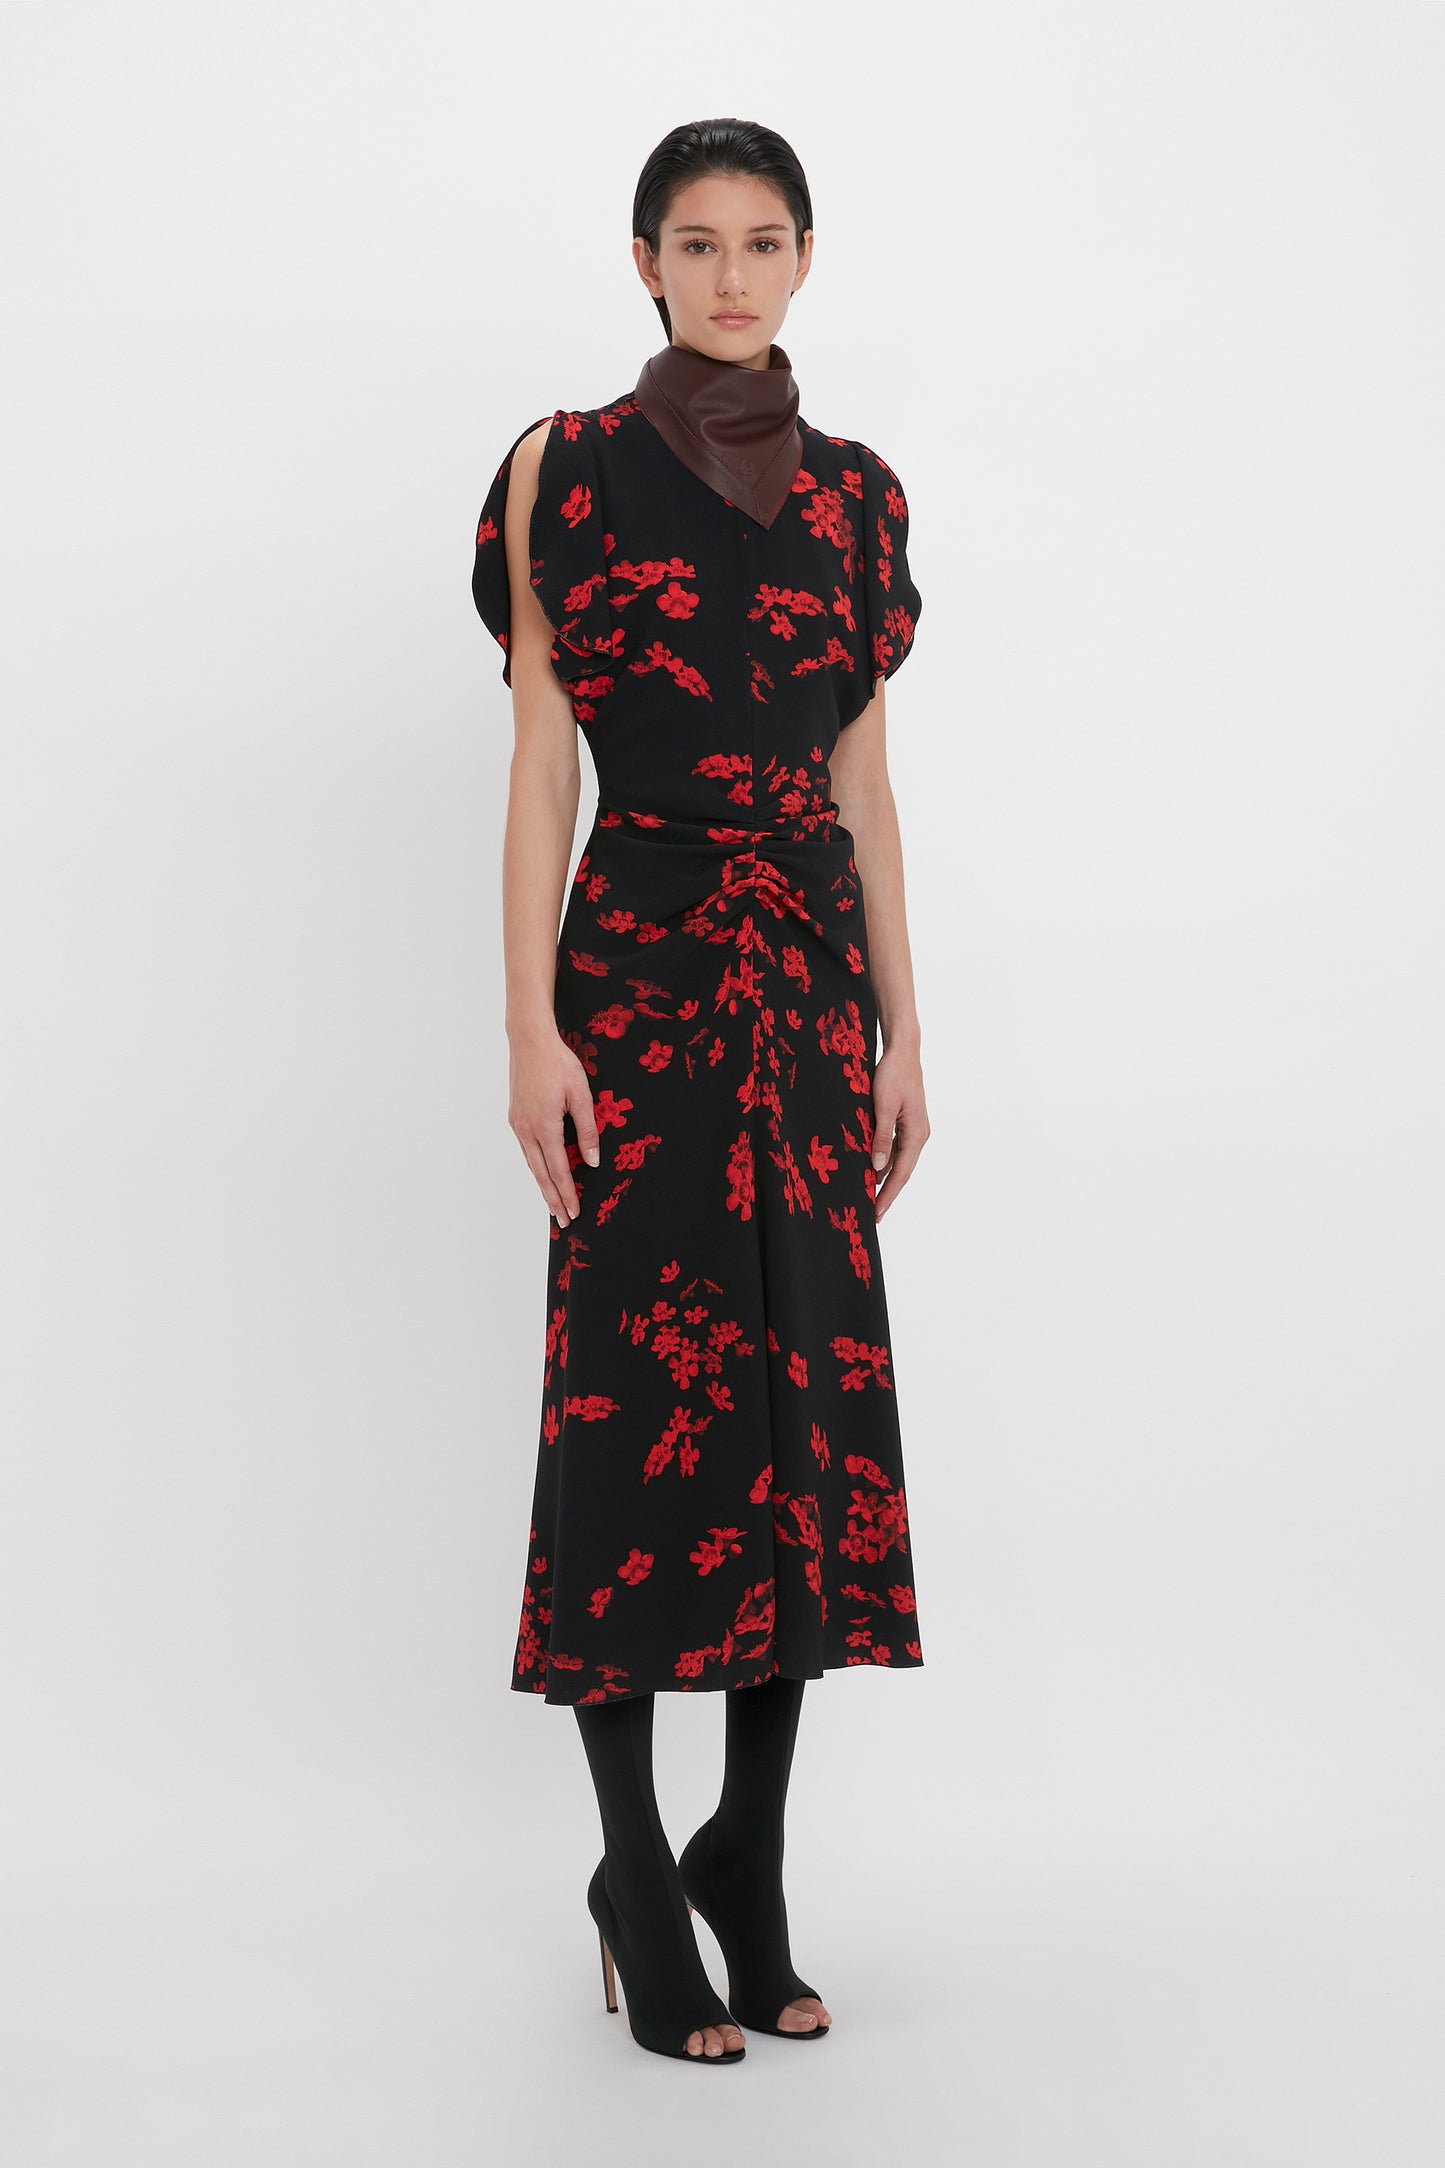 A person stands wearing a Victoria Beckham Gathered Waist Midi Dress In Sci-Fi Black Floral, black tights, black open-toe heels, and a dark scarf around their neck. Their hands are by their sides against a plain white background.